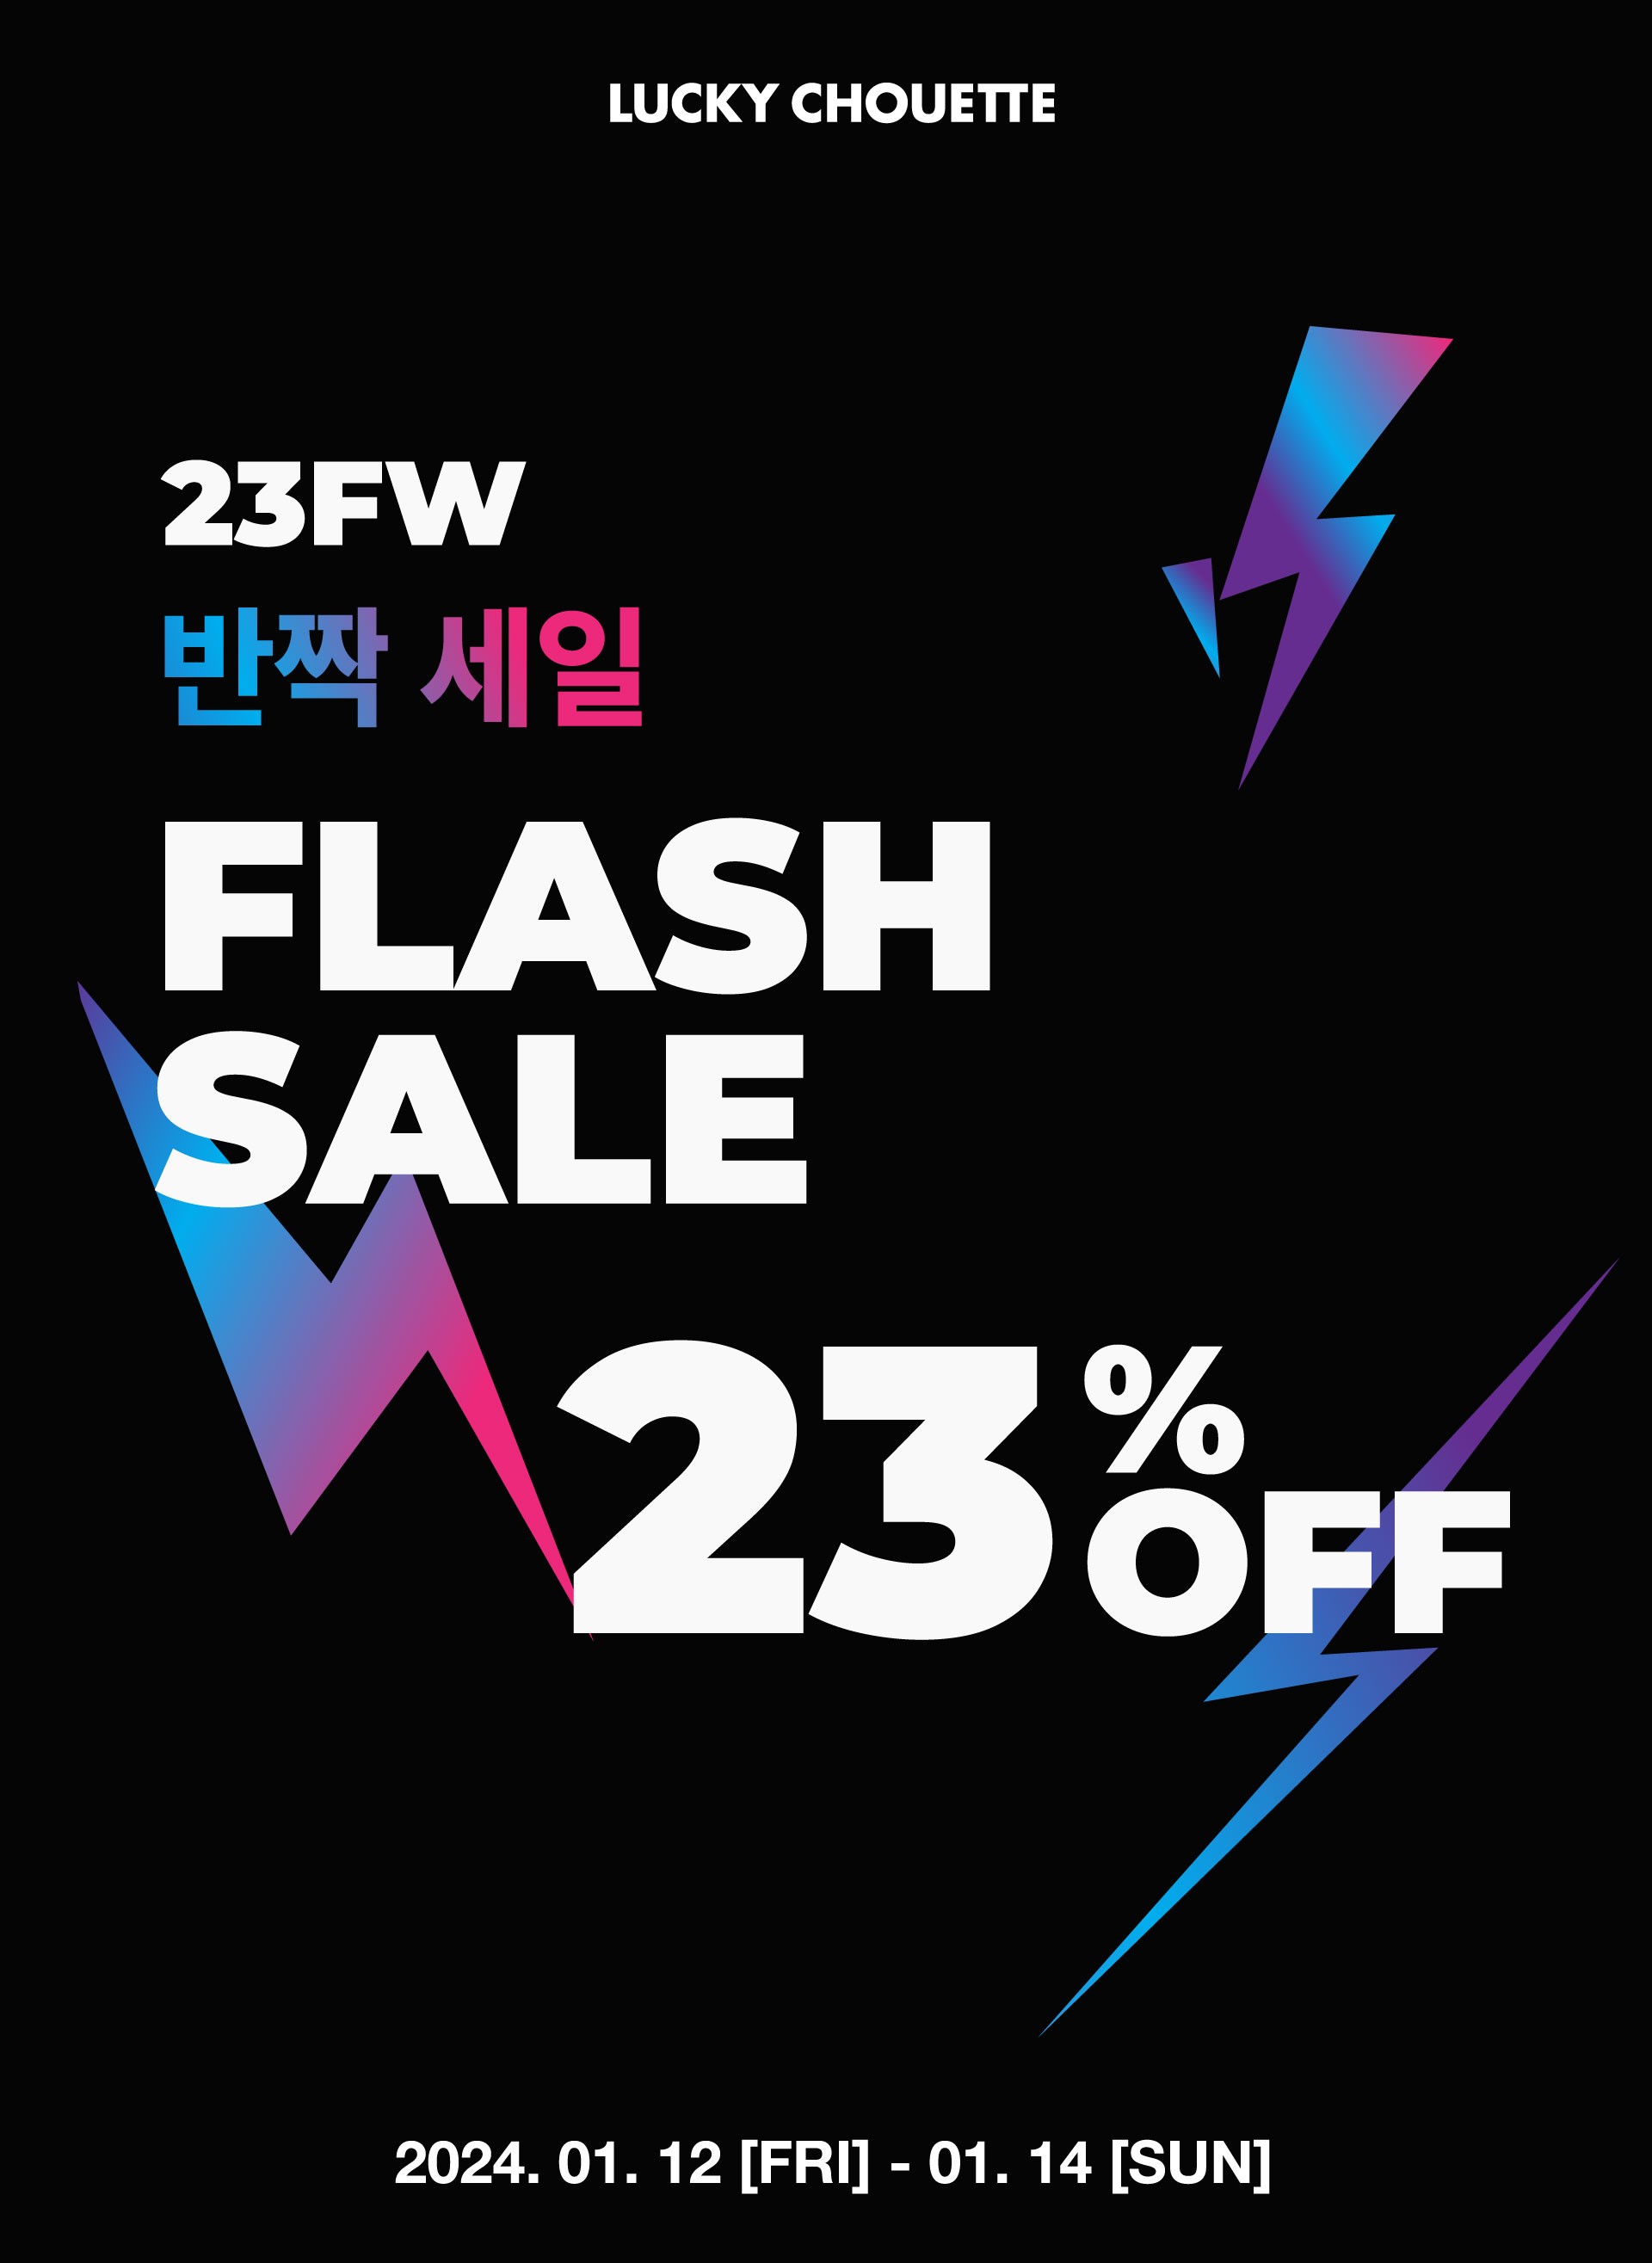 LUCKY FLASH SALE - 단 3일, 23FW 23% OFF